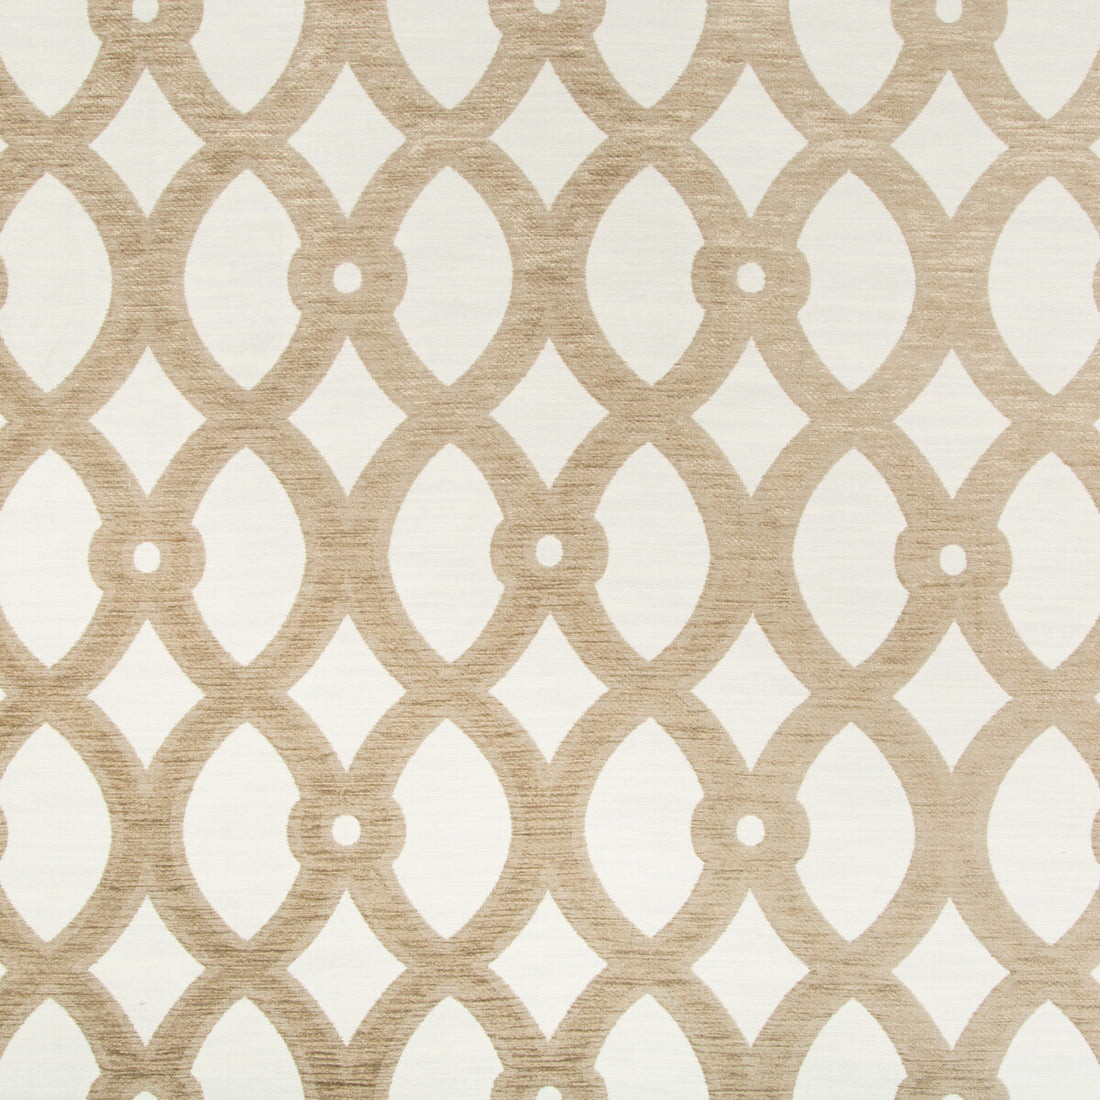 Kravet Design fabric in 34702-16 color - pattern 34702.16.0 - by Kravet Design in the Performance Crypton Home collection